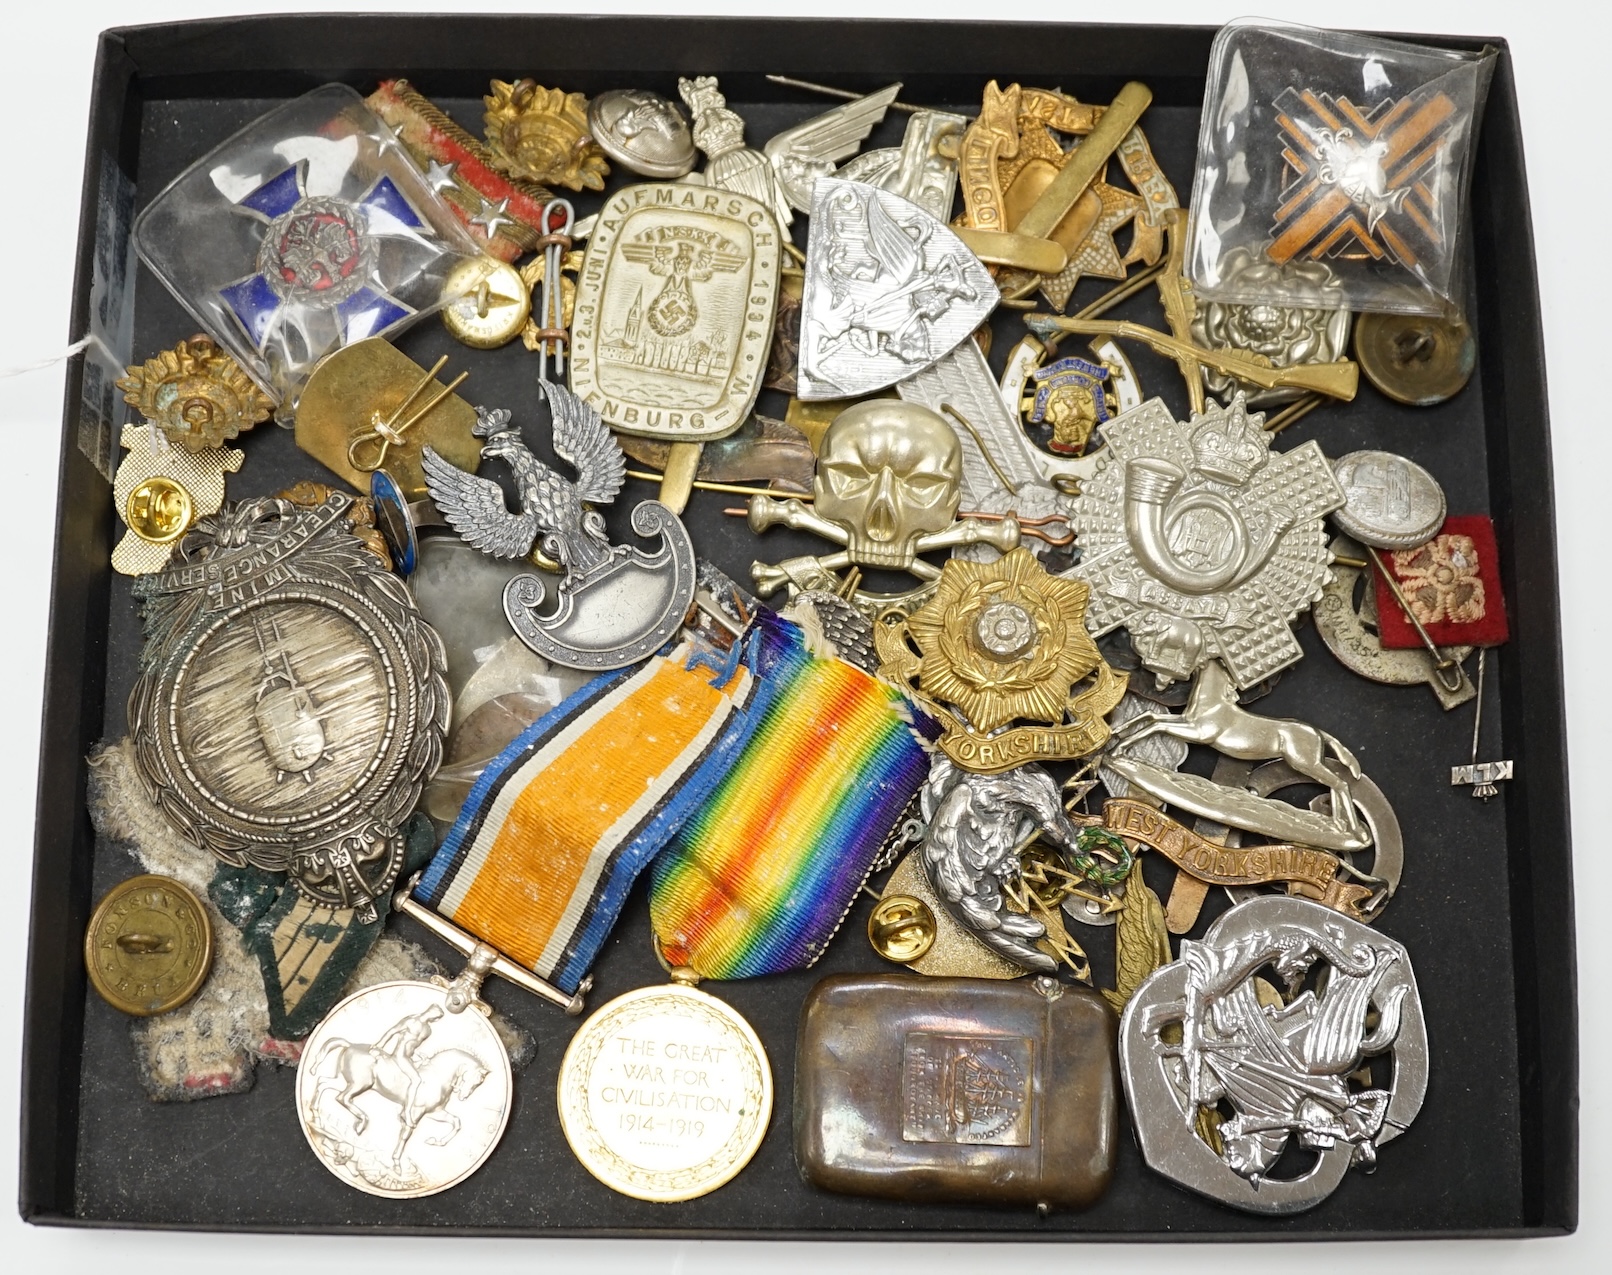 A collection of military cap badges and medals, including a First World War medal pair awarded to A.M. F.W. Wright, together with seventeen British and German cap badges including; the West Yorkshire Regiment, the Royal